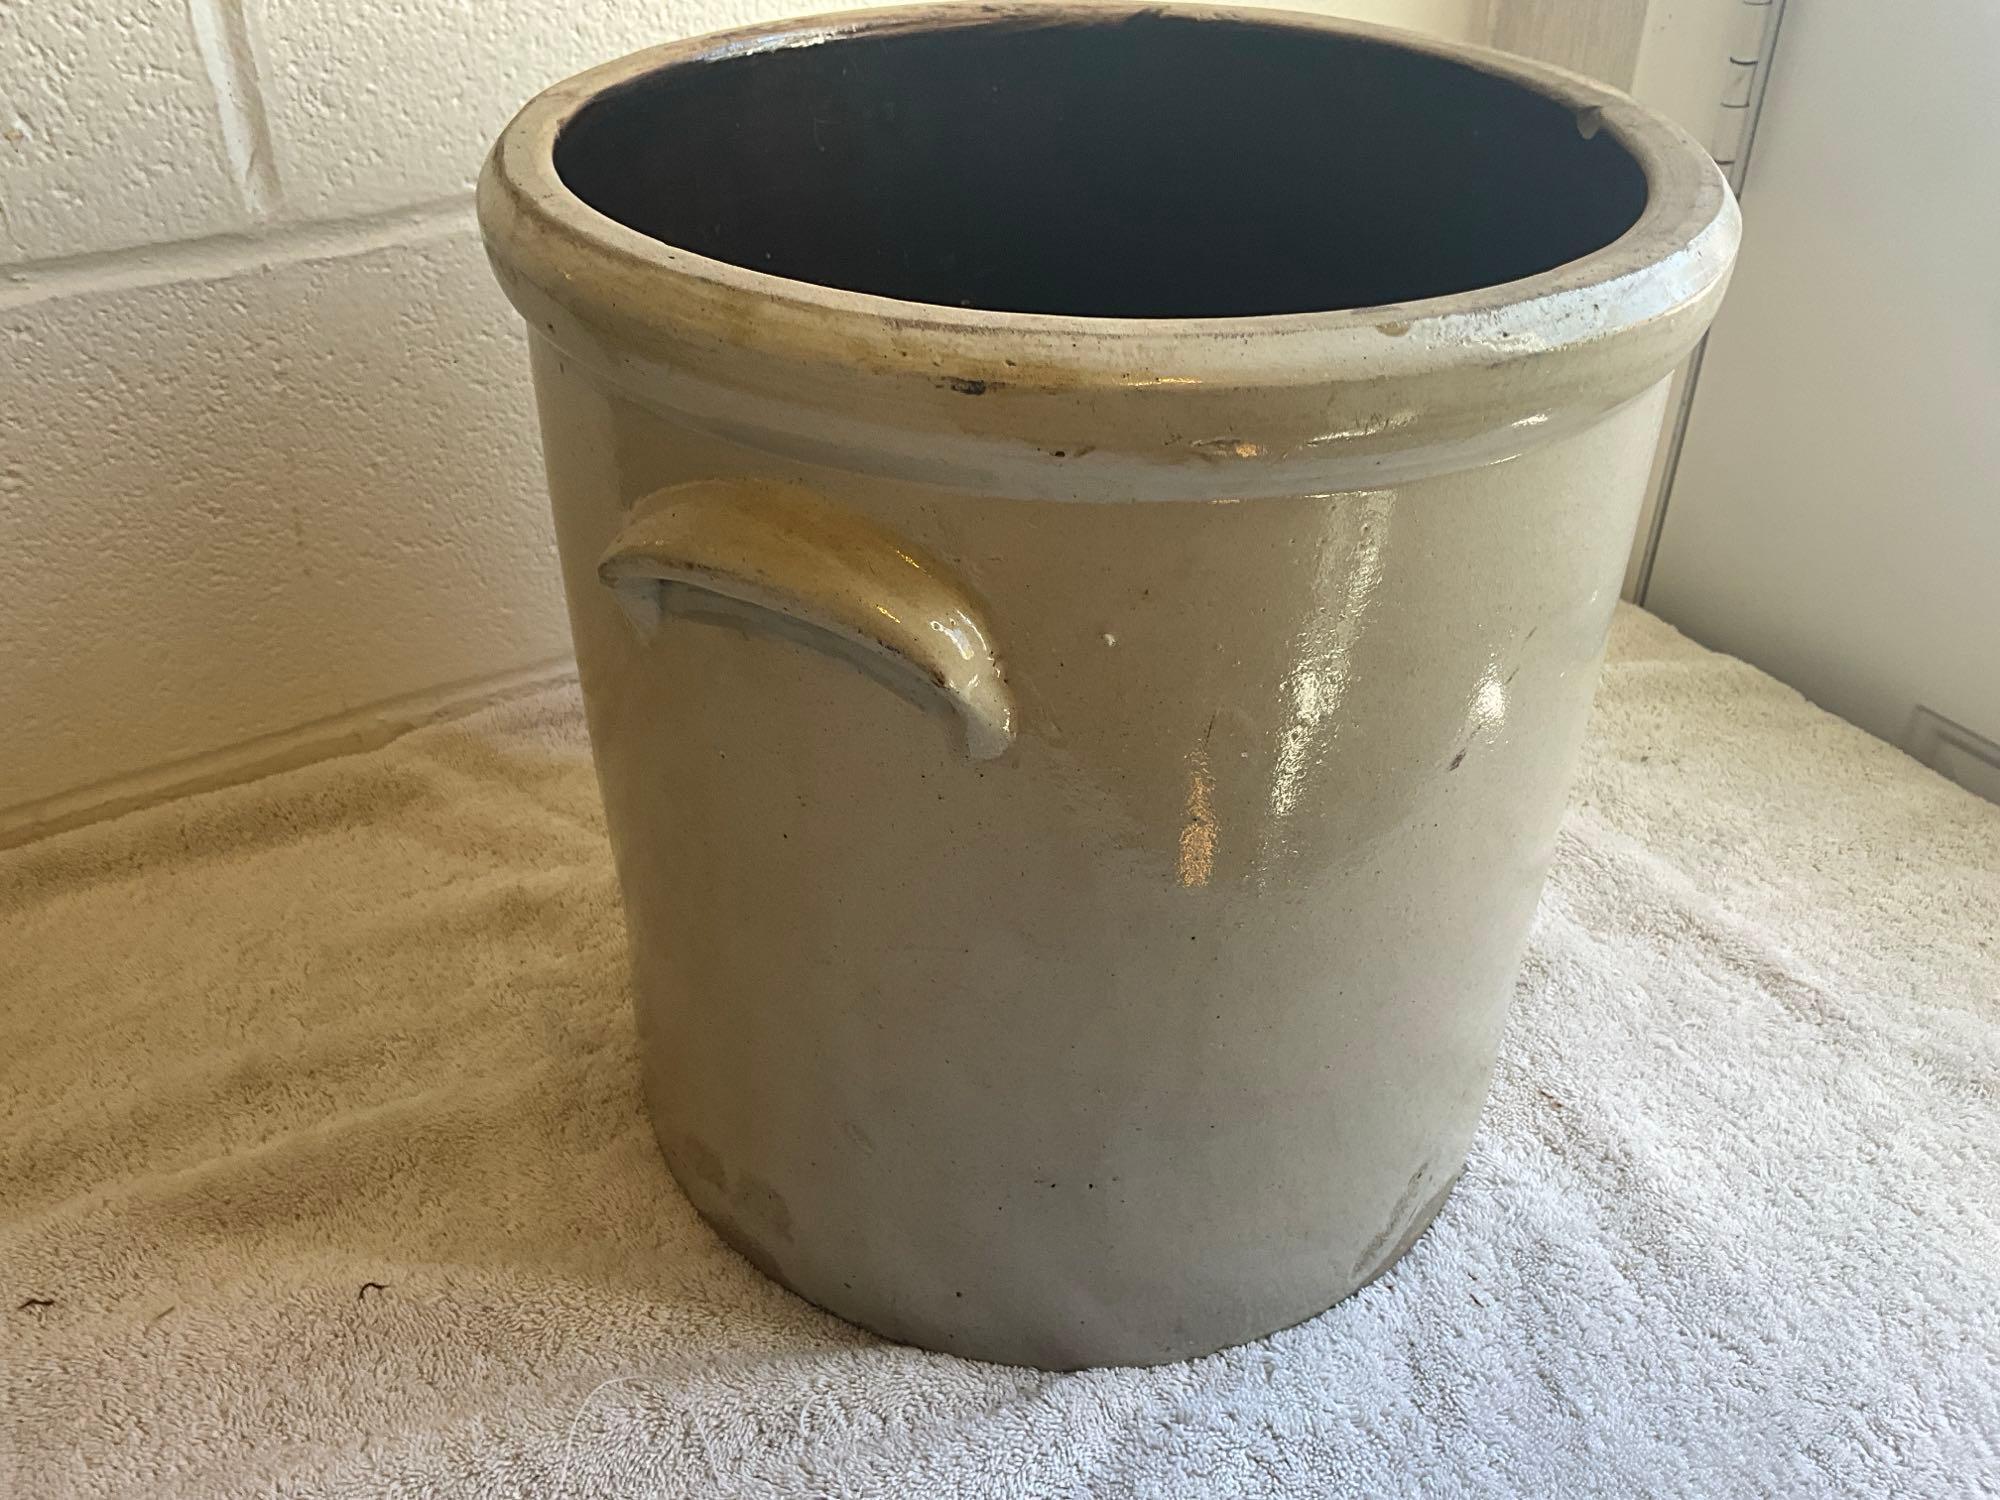 Monmouth Pottery Co 5 gal. crock